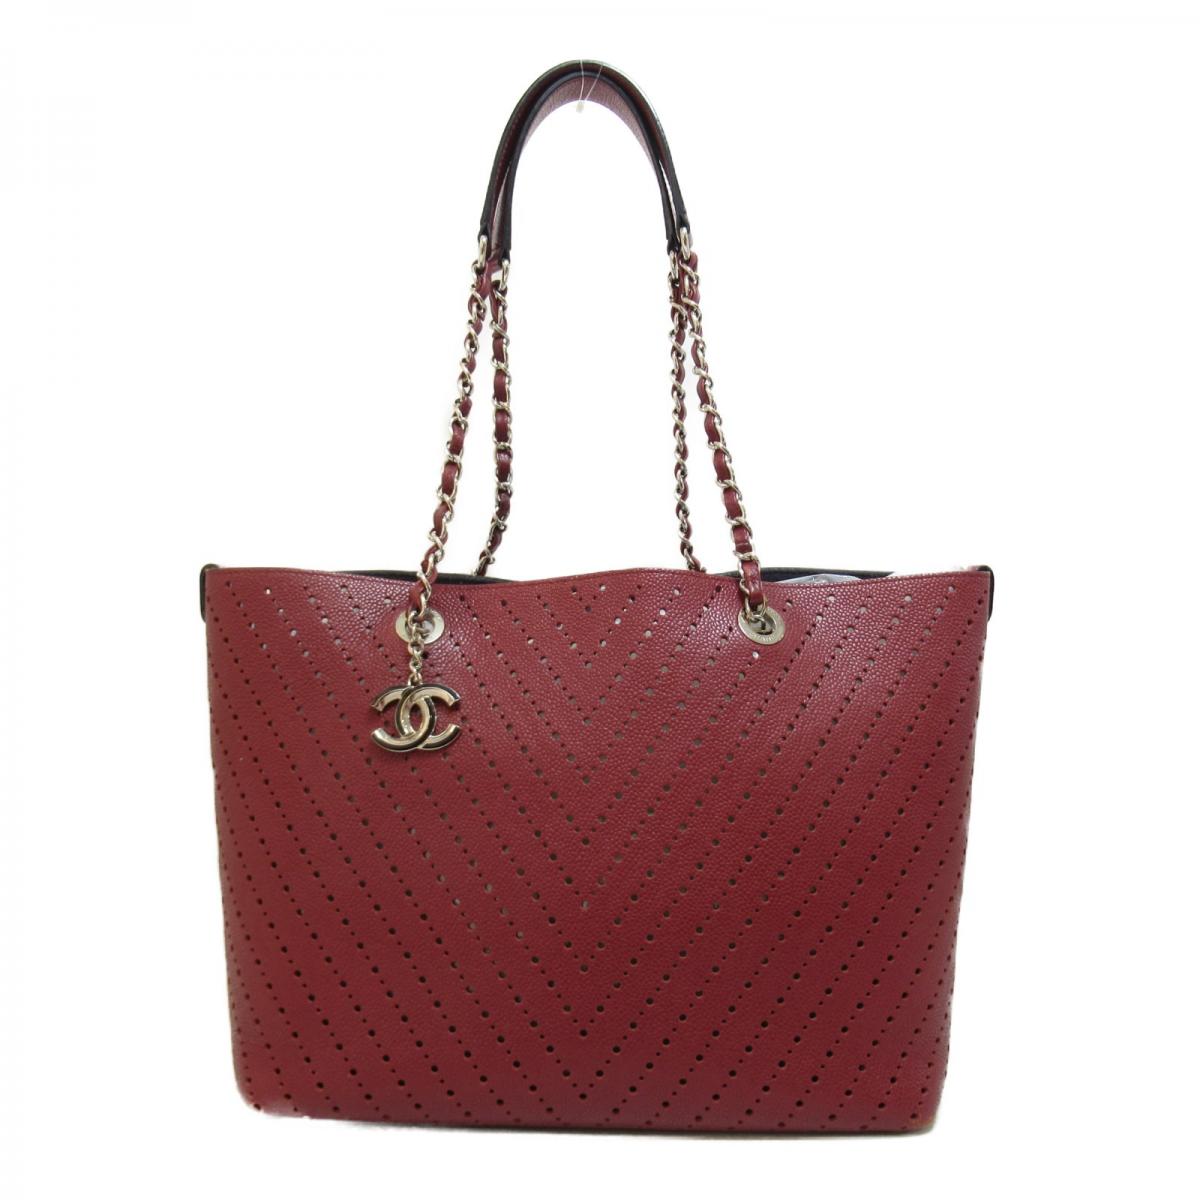 Perforated Chevron Leather Tote Bag